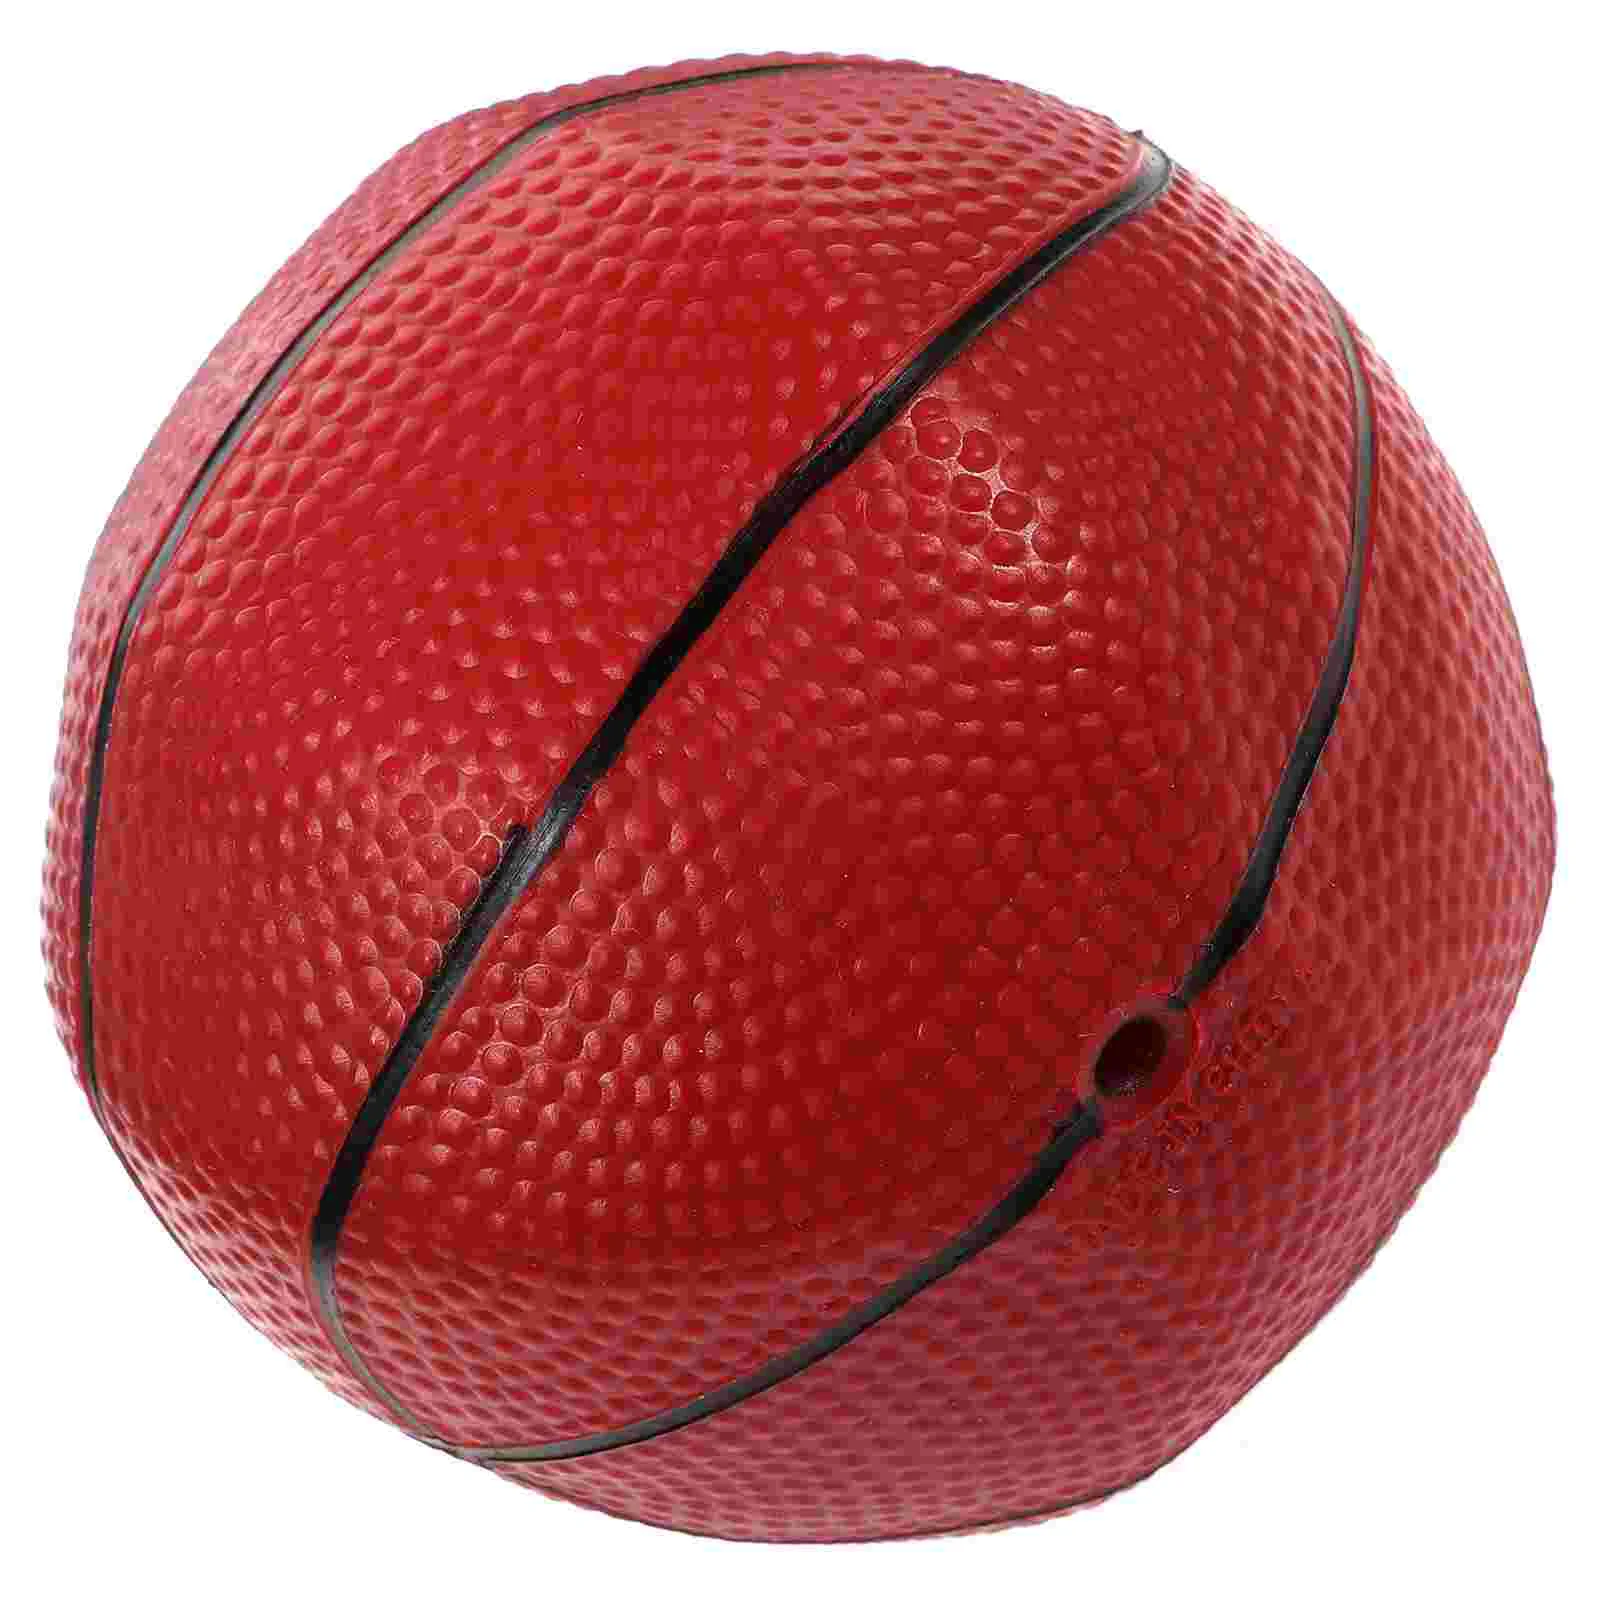 13cm Mini Inflatable Bouncy Basketball Indoor Outdoor Sports Ball Jumping Stress - £10.31 GBP